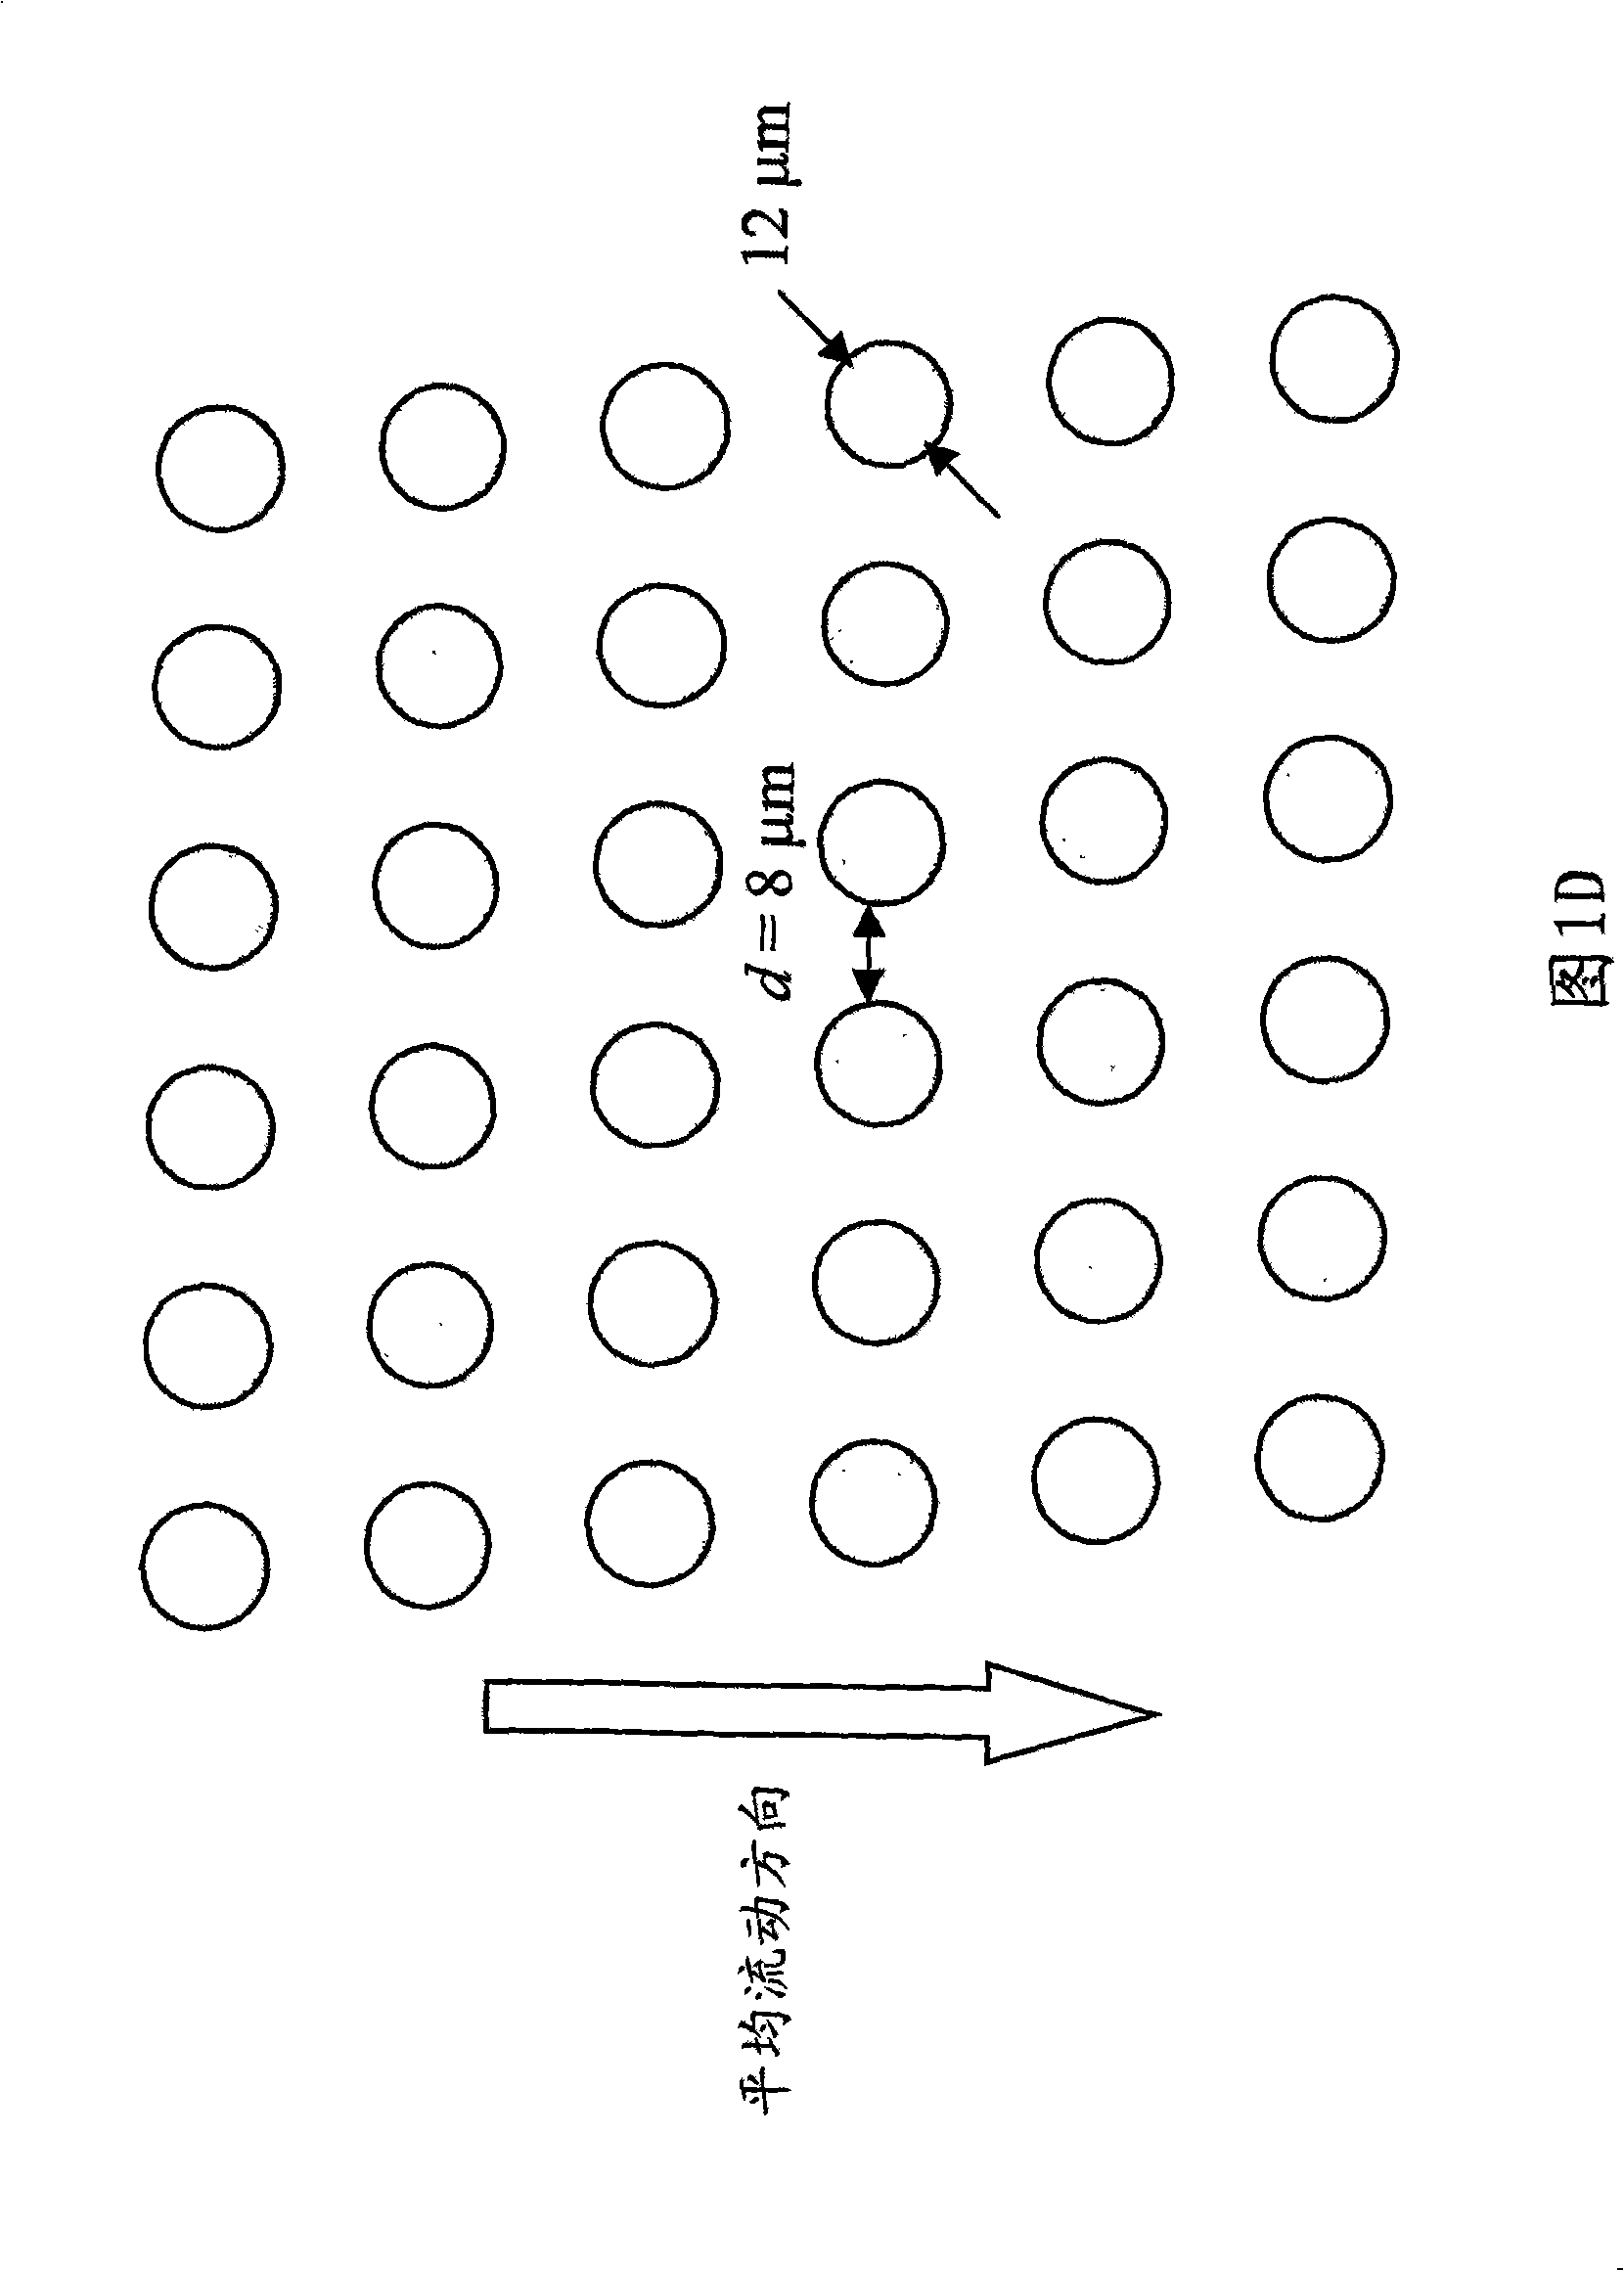 Devices and methods for magnetic enrichment of cells and other particles